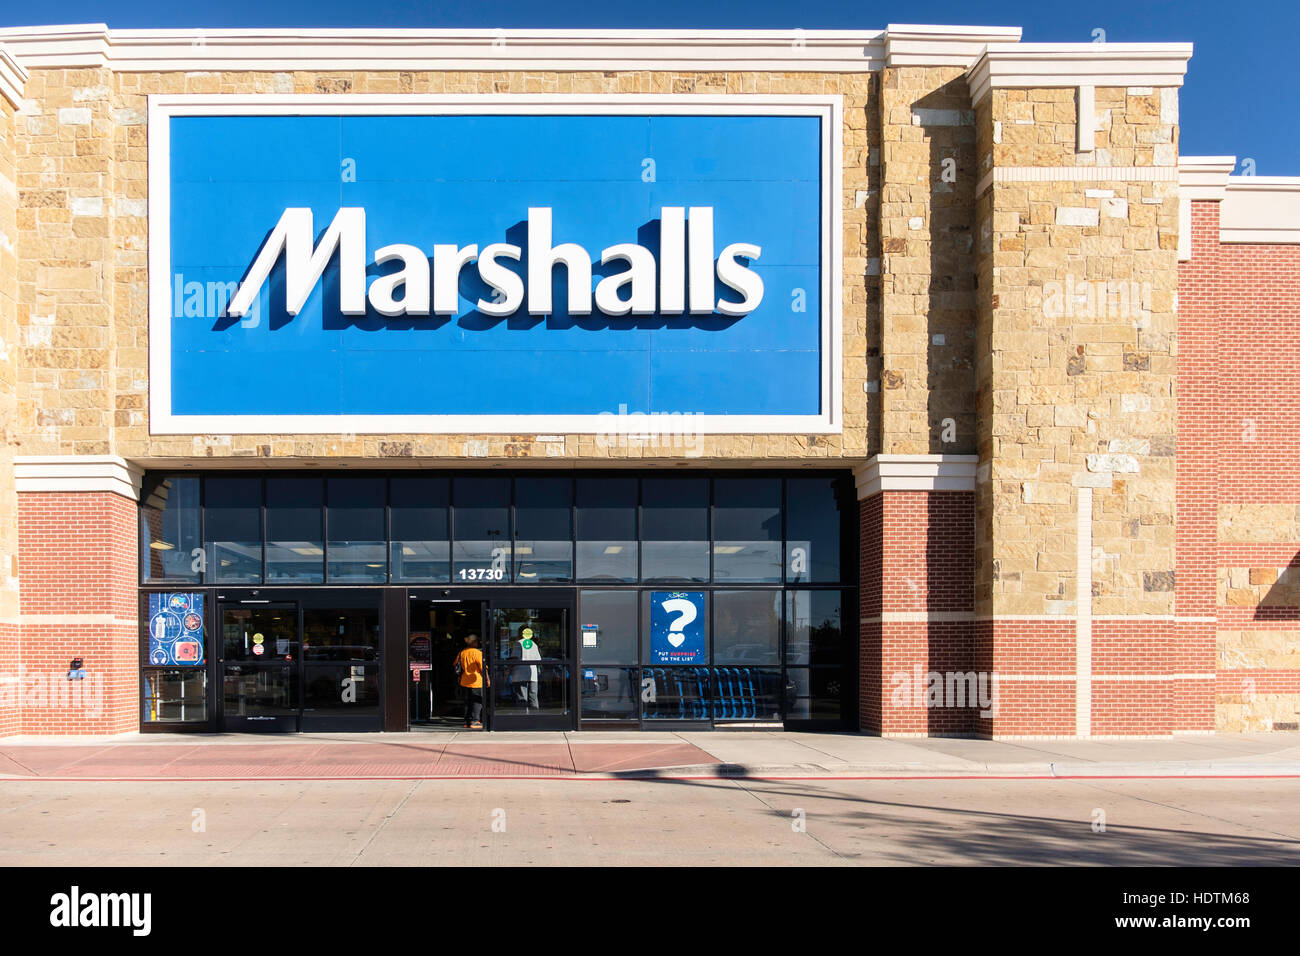 The exterior and entrance of Marshalls, an off-price department store on Memorial road, Oklahoma City, Oklahoma, USA. Stock Photo